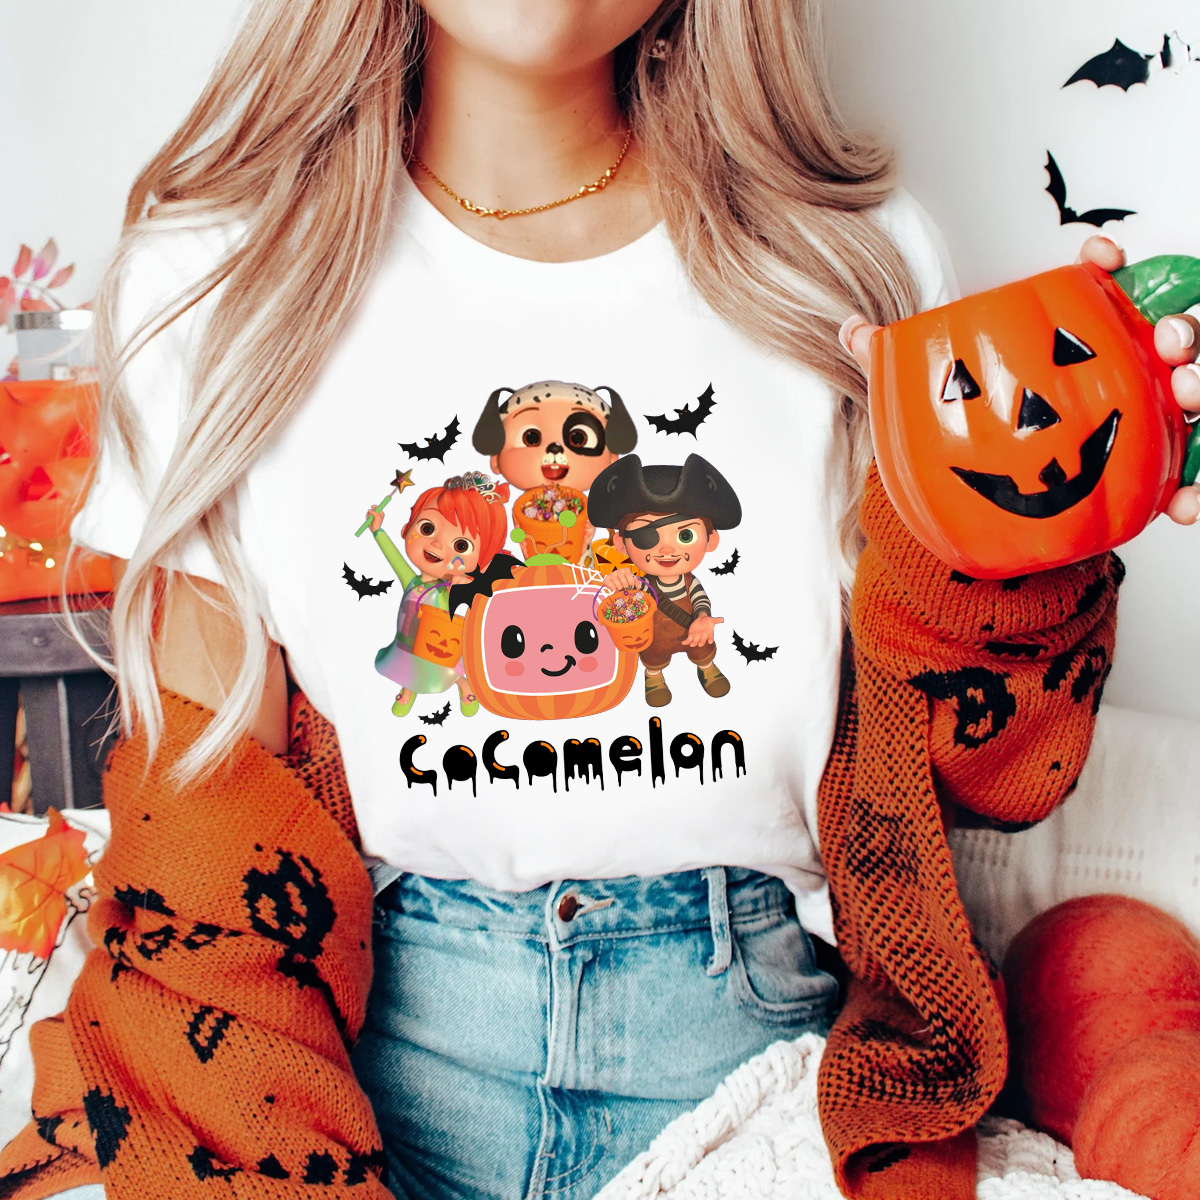 Cocomelon Halloween T-Shirt, Cocomelon Party Halloween Shirts, Cocomelon Birthday Boy Shirt, Cocomelon Family Shirt, Family Matching Shirt